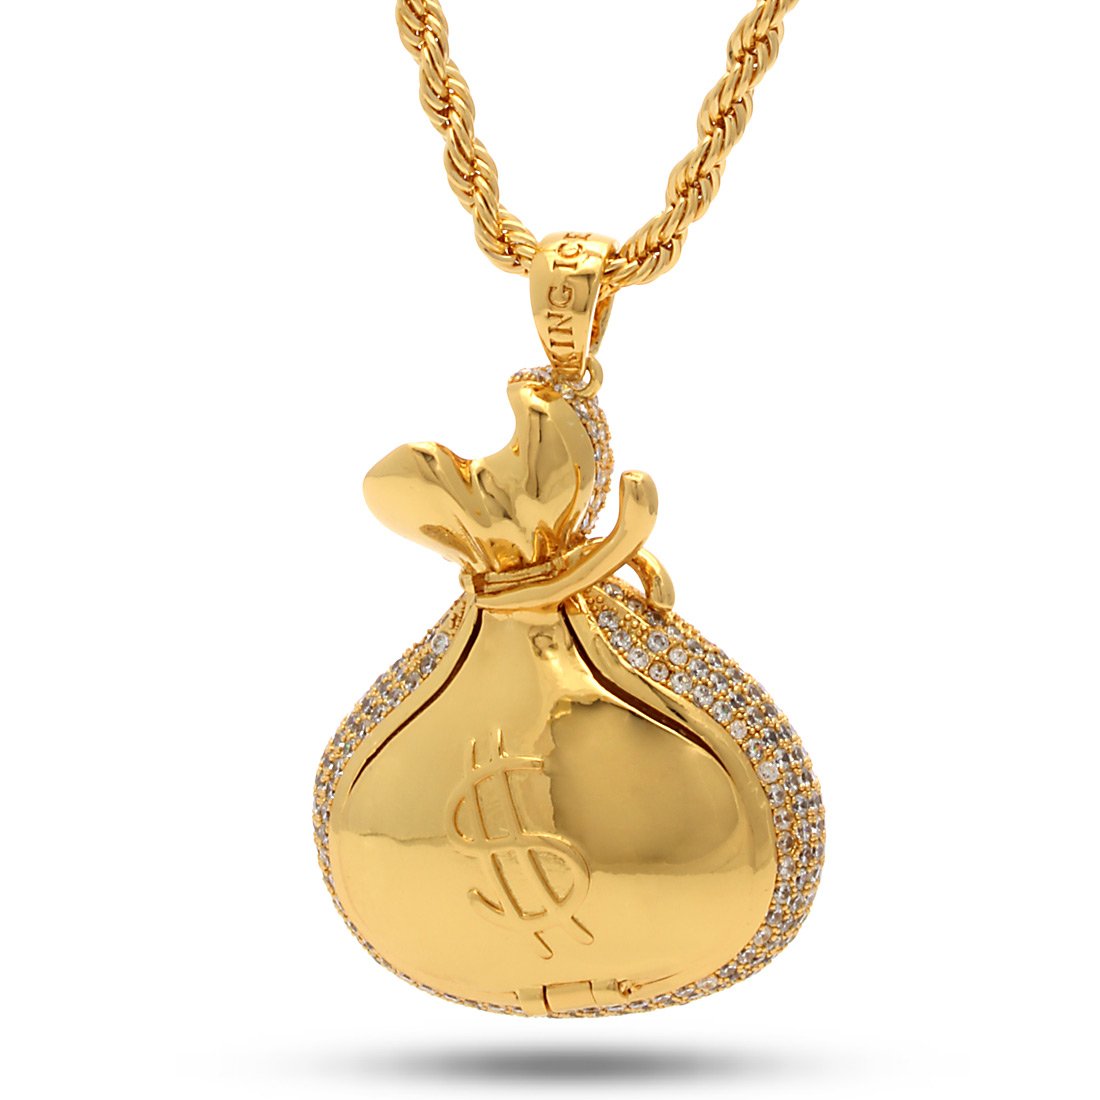 Rose Gold Money Bag Necklace - Designed by Snoop Dogg x King Ice